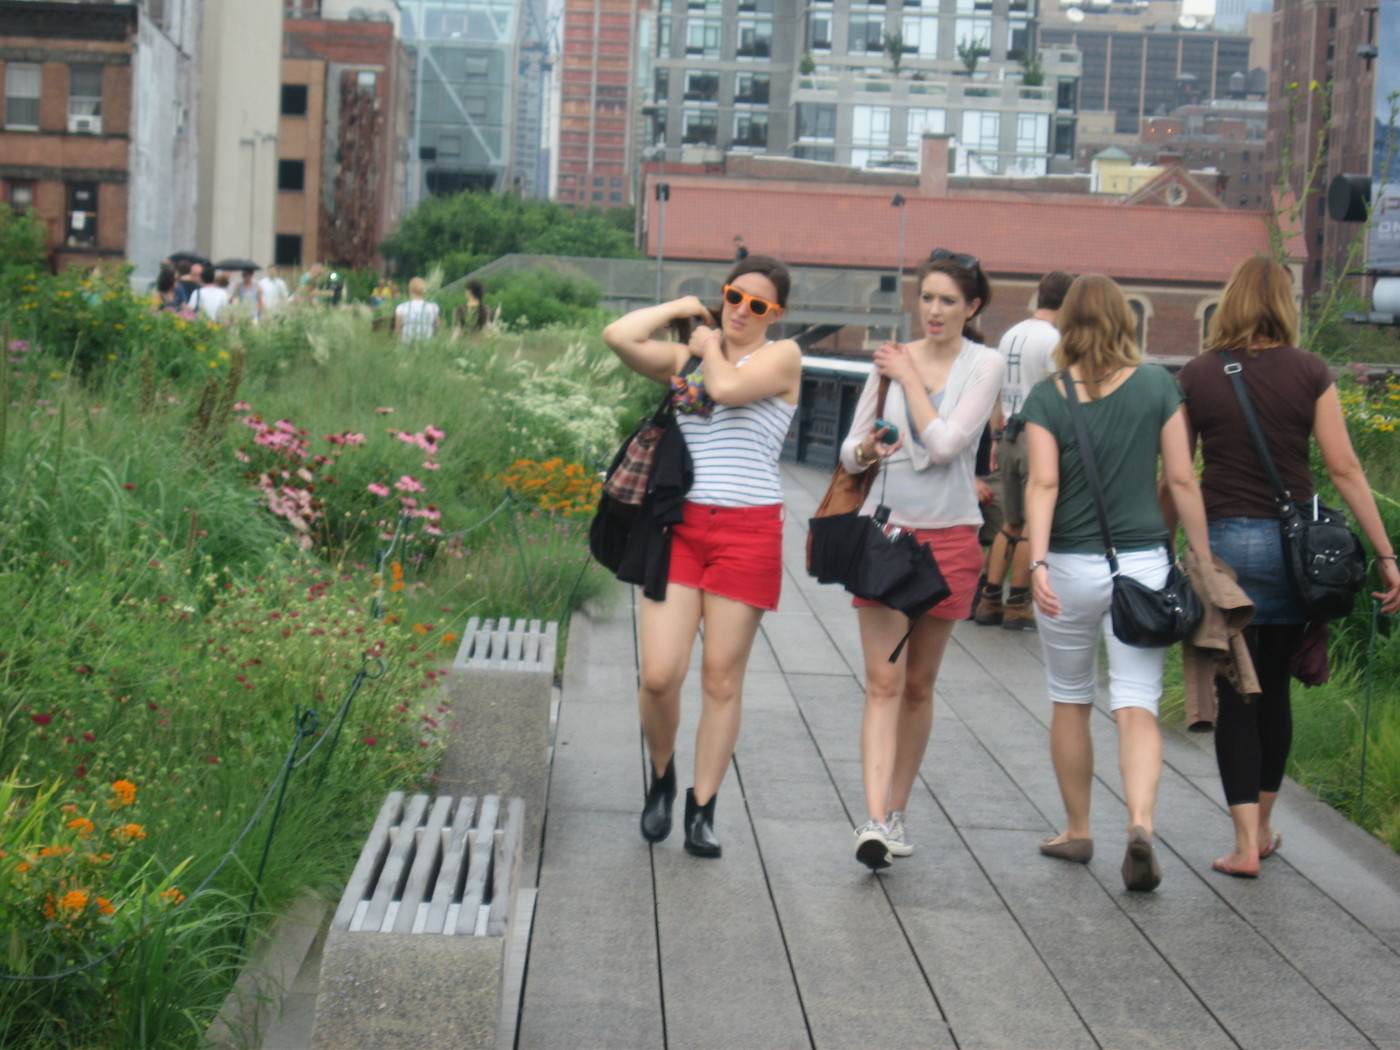 The High Line in New York City by Field Operations and Diller Scofidio + Renfro, image: Allyson Mendenhall